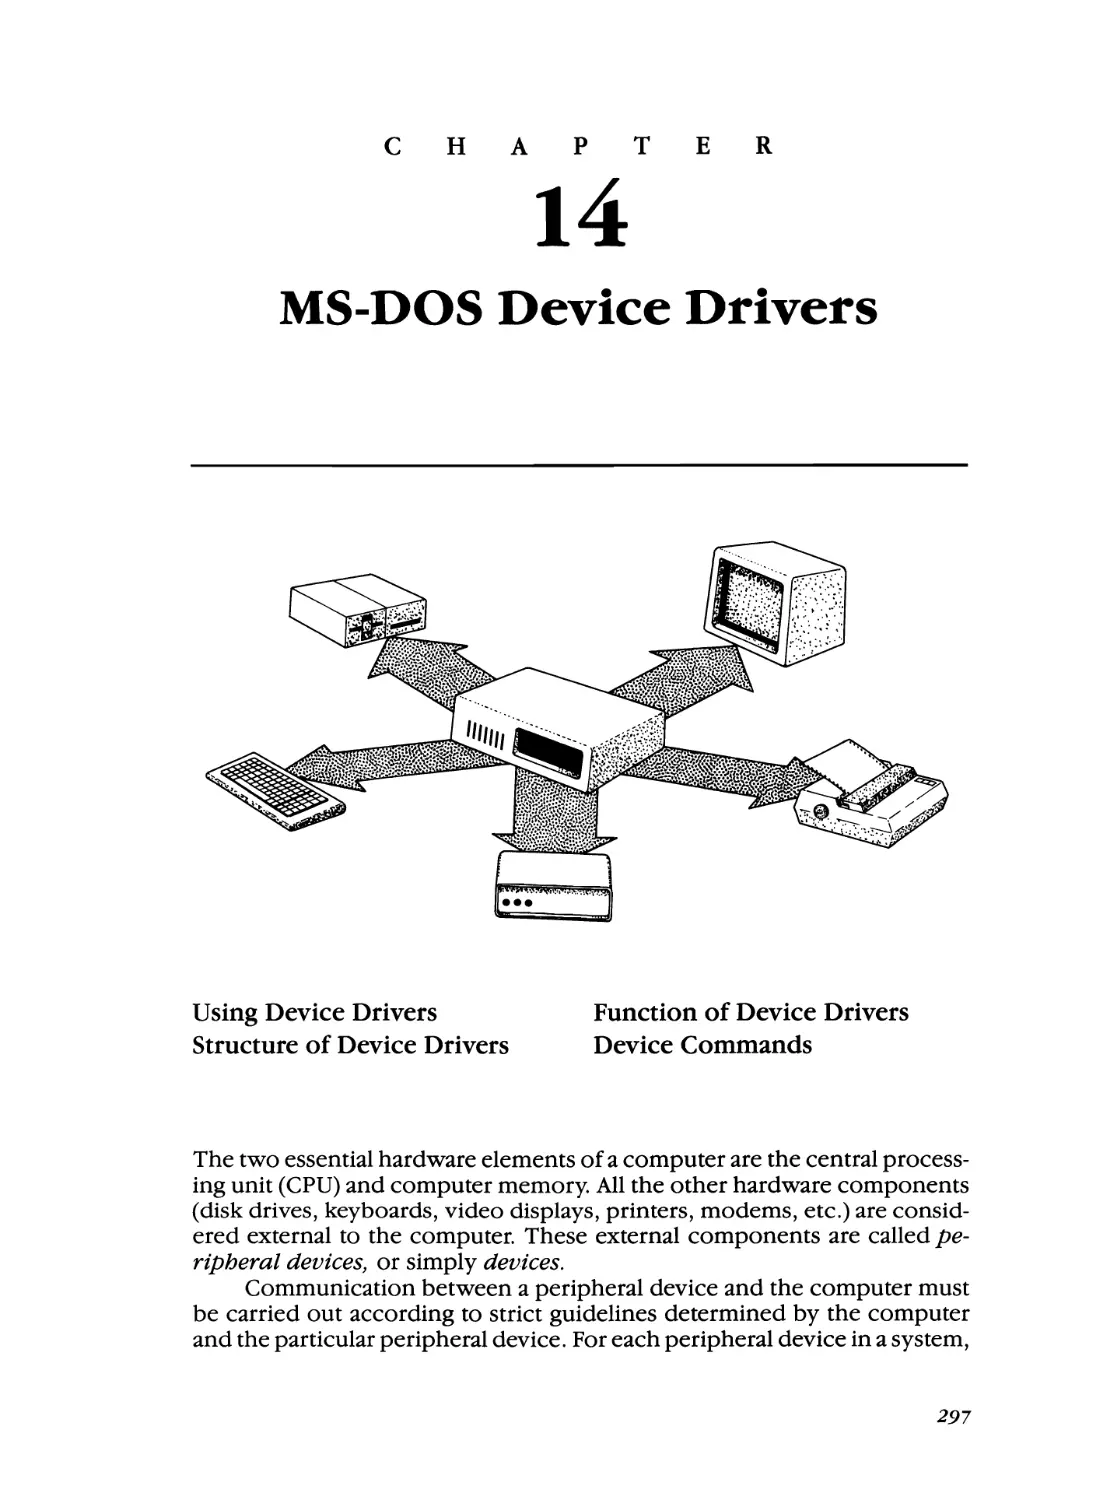 Chapter 14 - MS-DOS Device Drivers